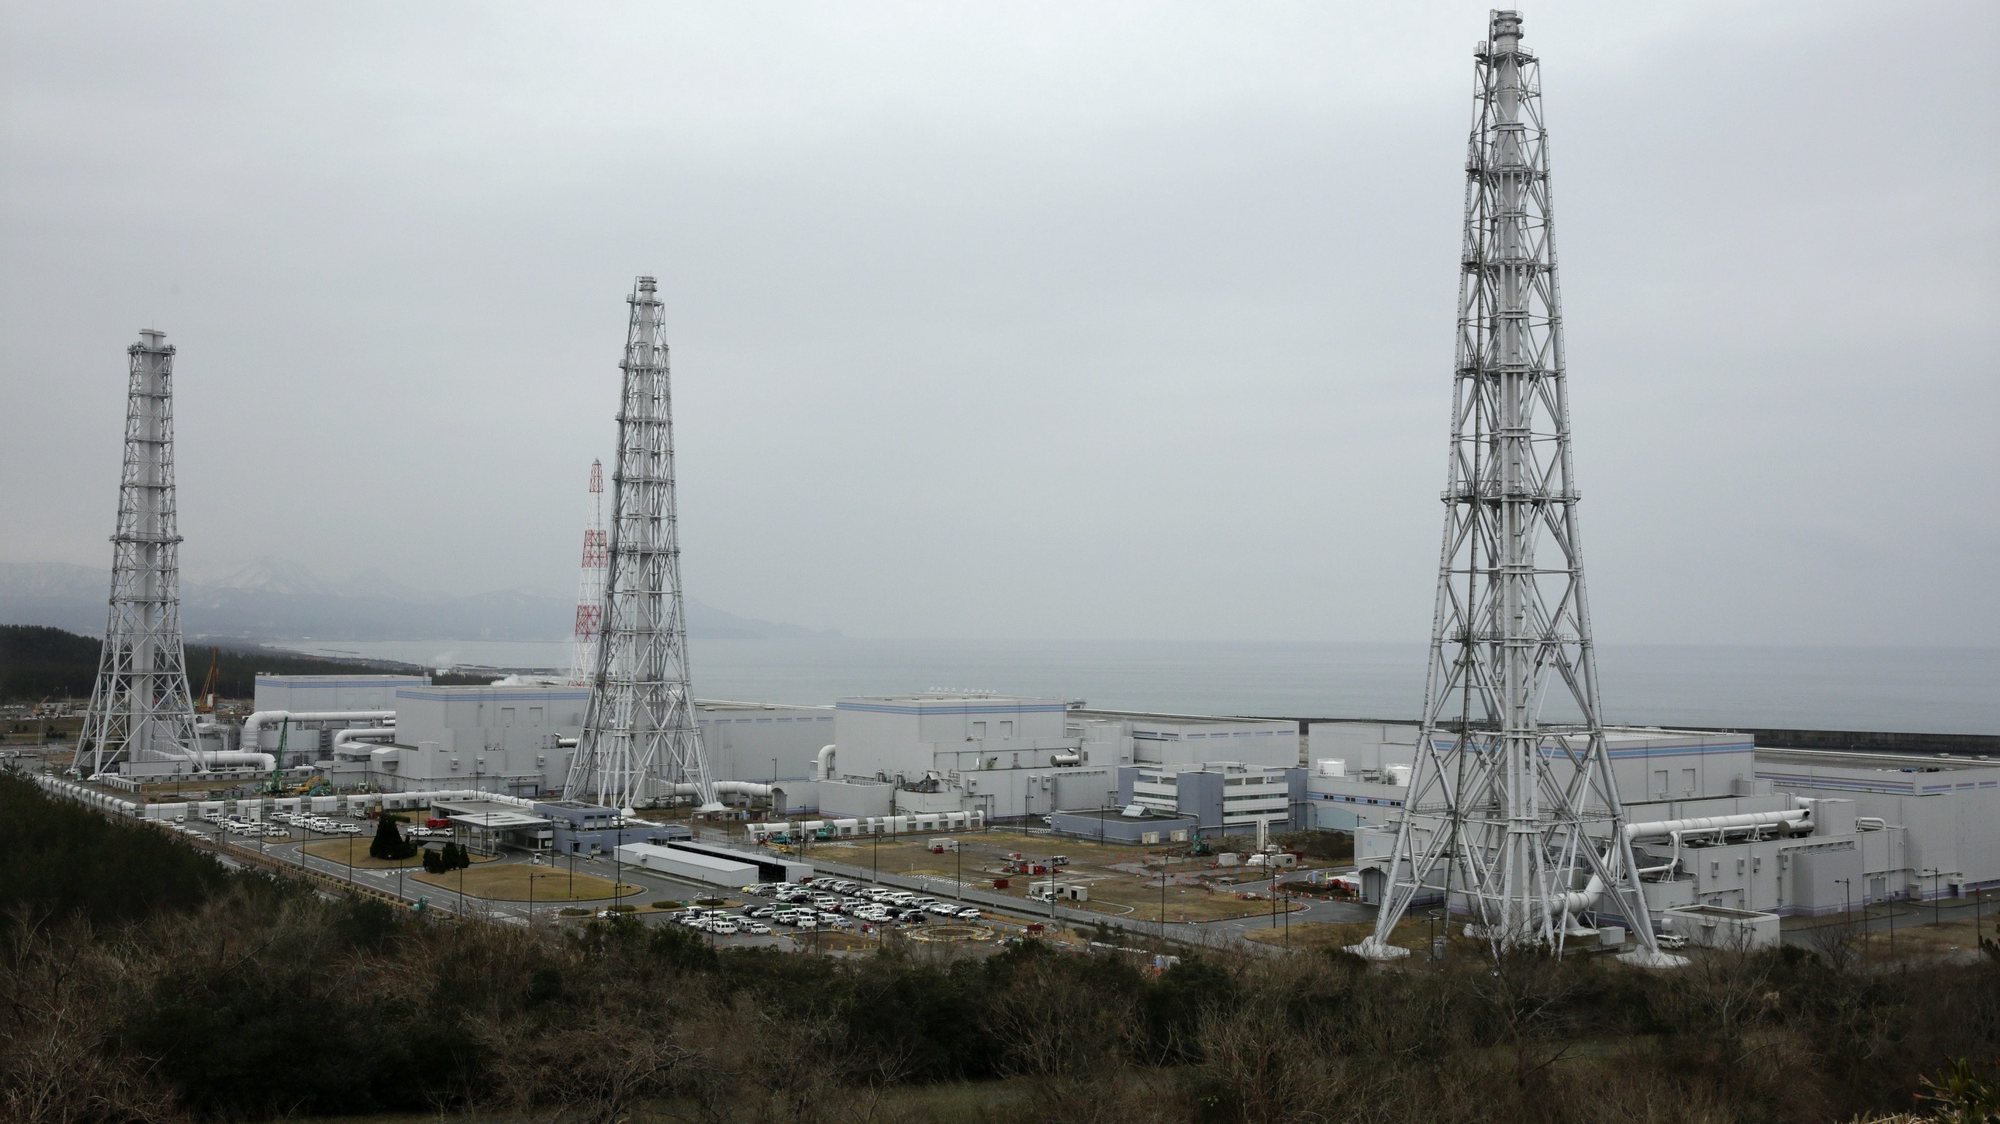 epa04637091 Reactor buildings unit one (L, rear) through unit four (R) are seen at Tokyo Electric Power Co.&#039;s Kashiwazaki Kariwa Nuclear Power Plant, which is the world&#039;s largest nuclear power plant, in Kariwa, Niigata Prefecture, northern Japan, 25 February 2015 for safety enhancement measures after the 2011 March 11 accident at Fukushima Daiichi Nuclear Power Plant.  EPA/KIMIMASA MAYAMA